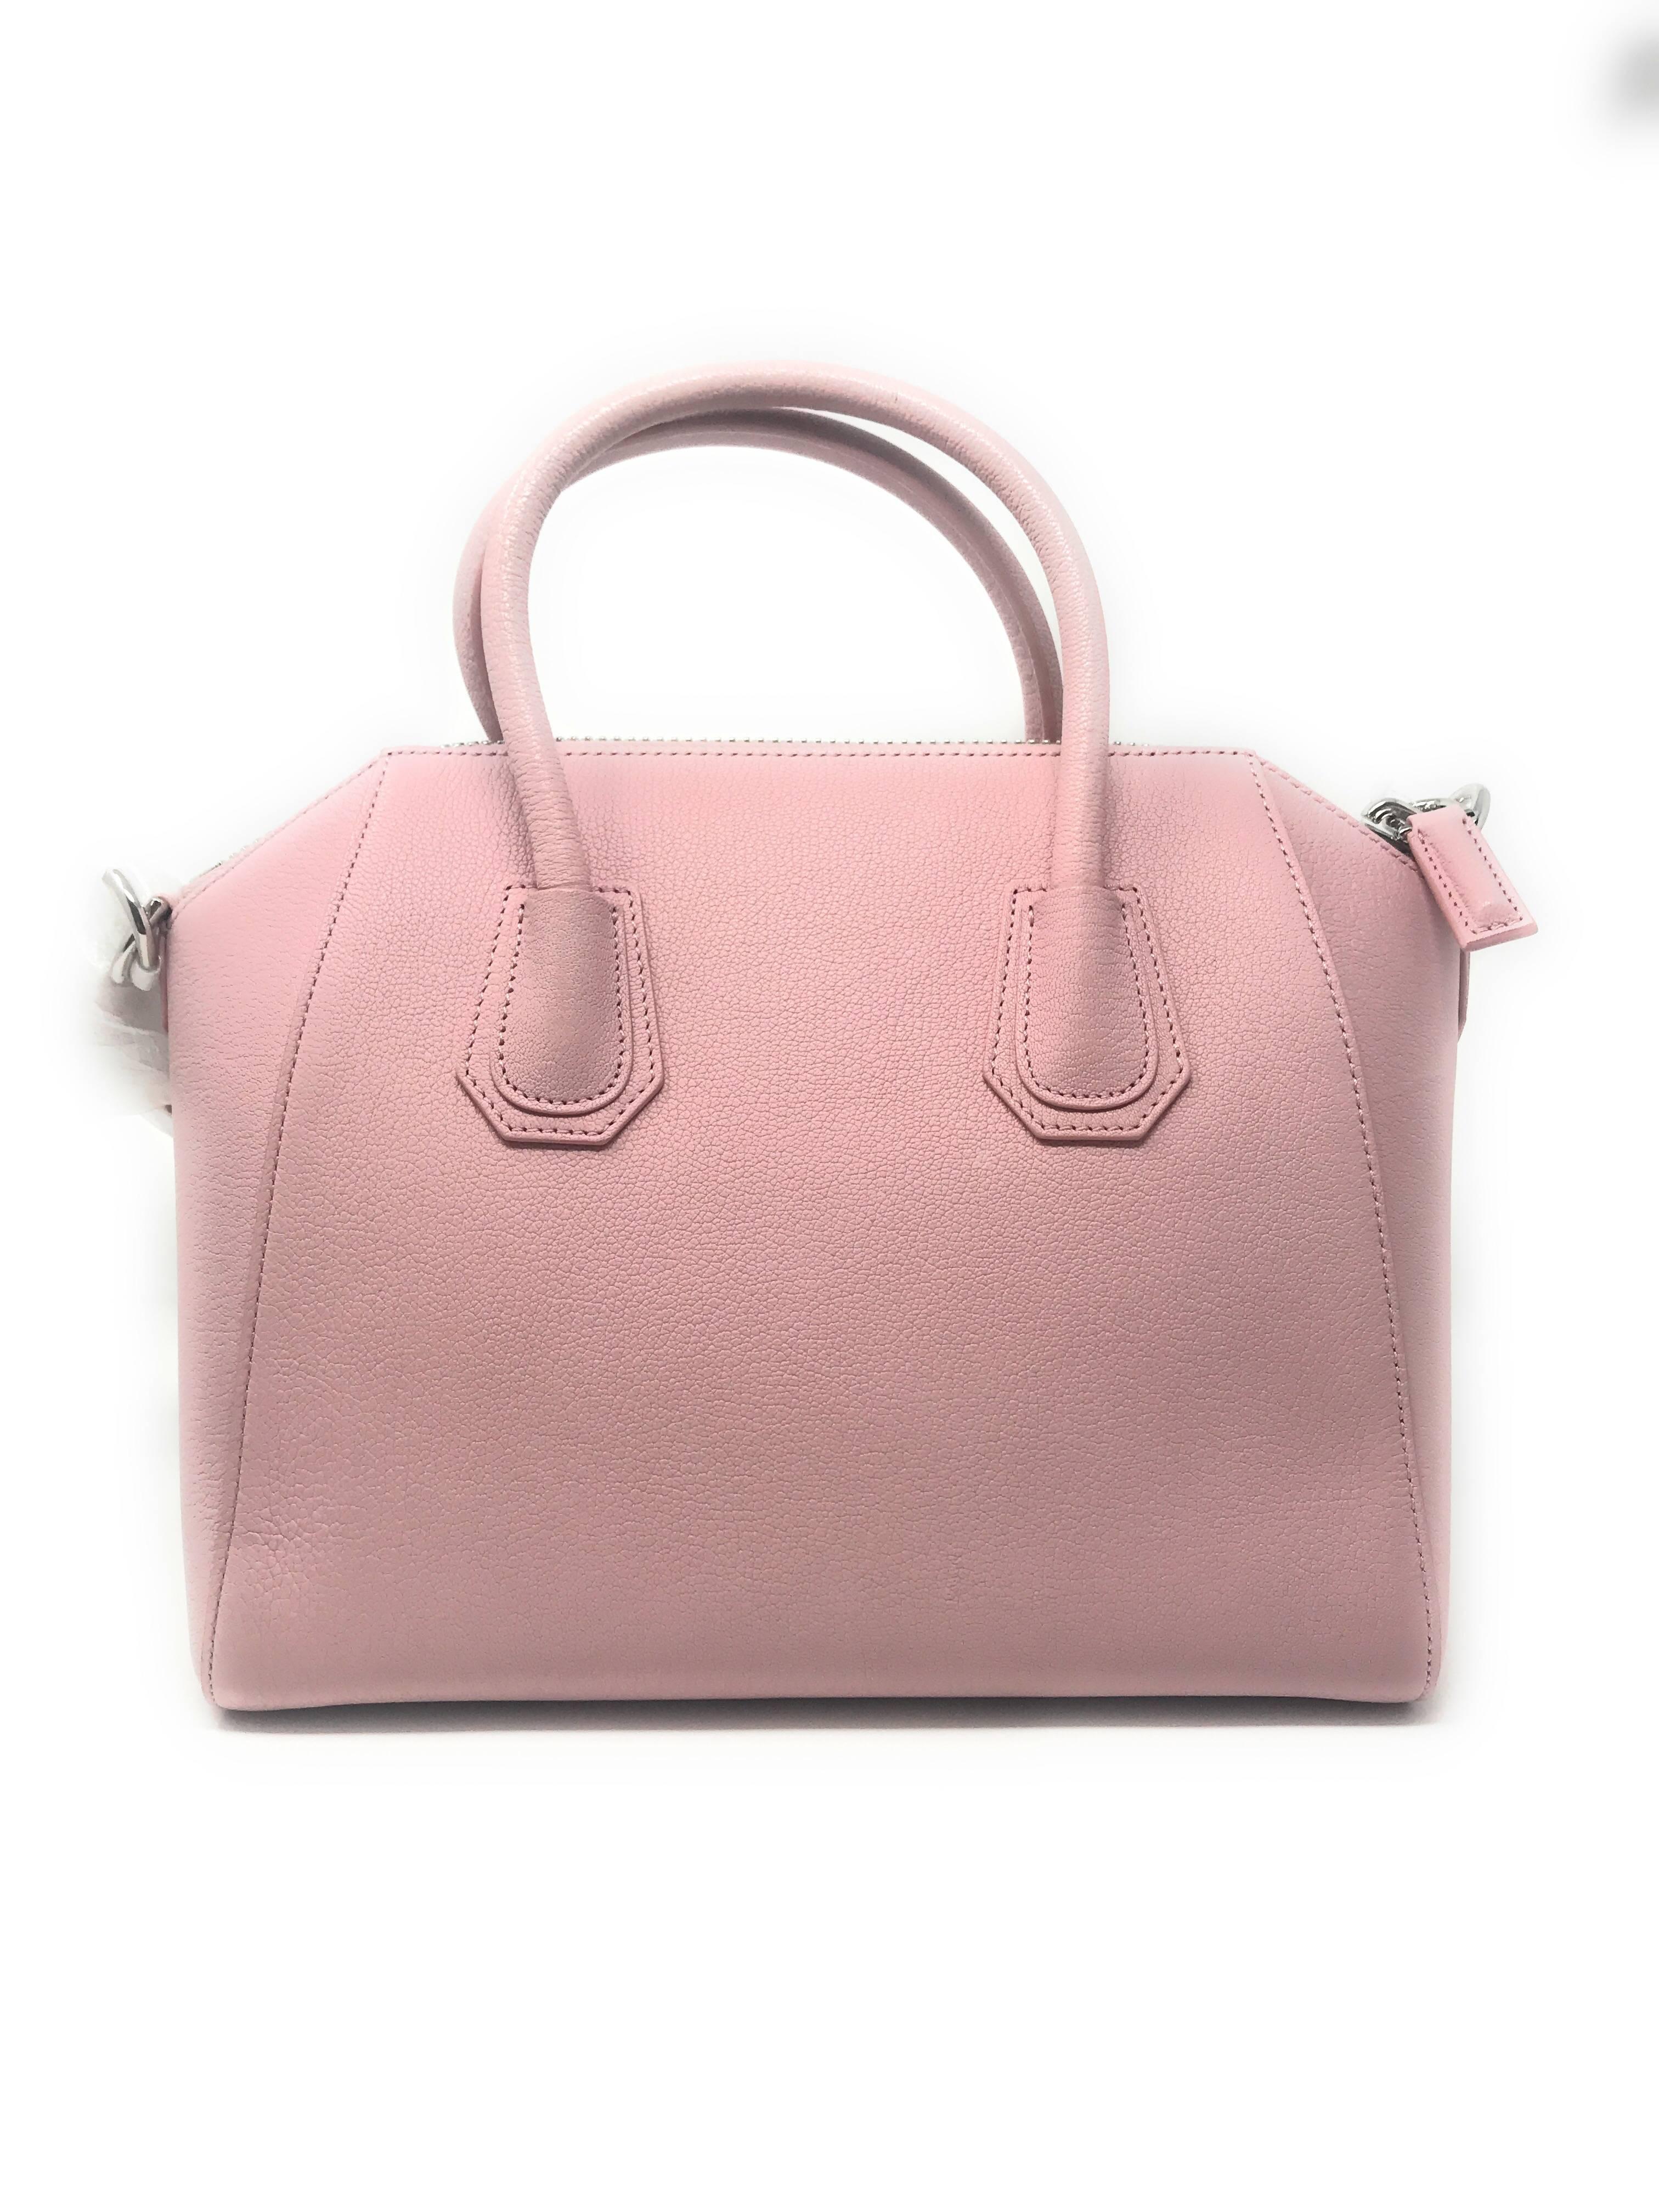 One of the most popular Givenchy designs, Antigona, in Baby Pink color. Expertly crafted in Italy from textured leather, it has a structured shape with 2 rolled top handles and a leather shoulder strap for versatility. It has a zippered top and is